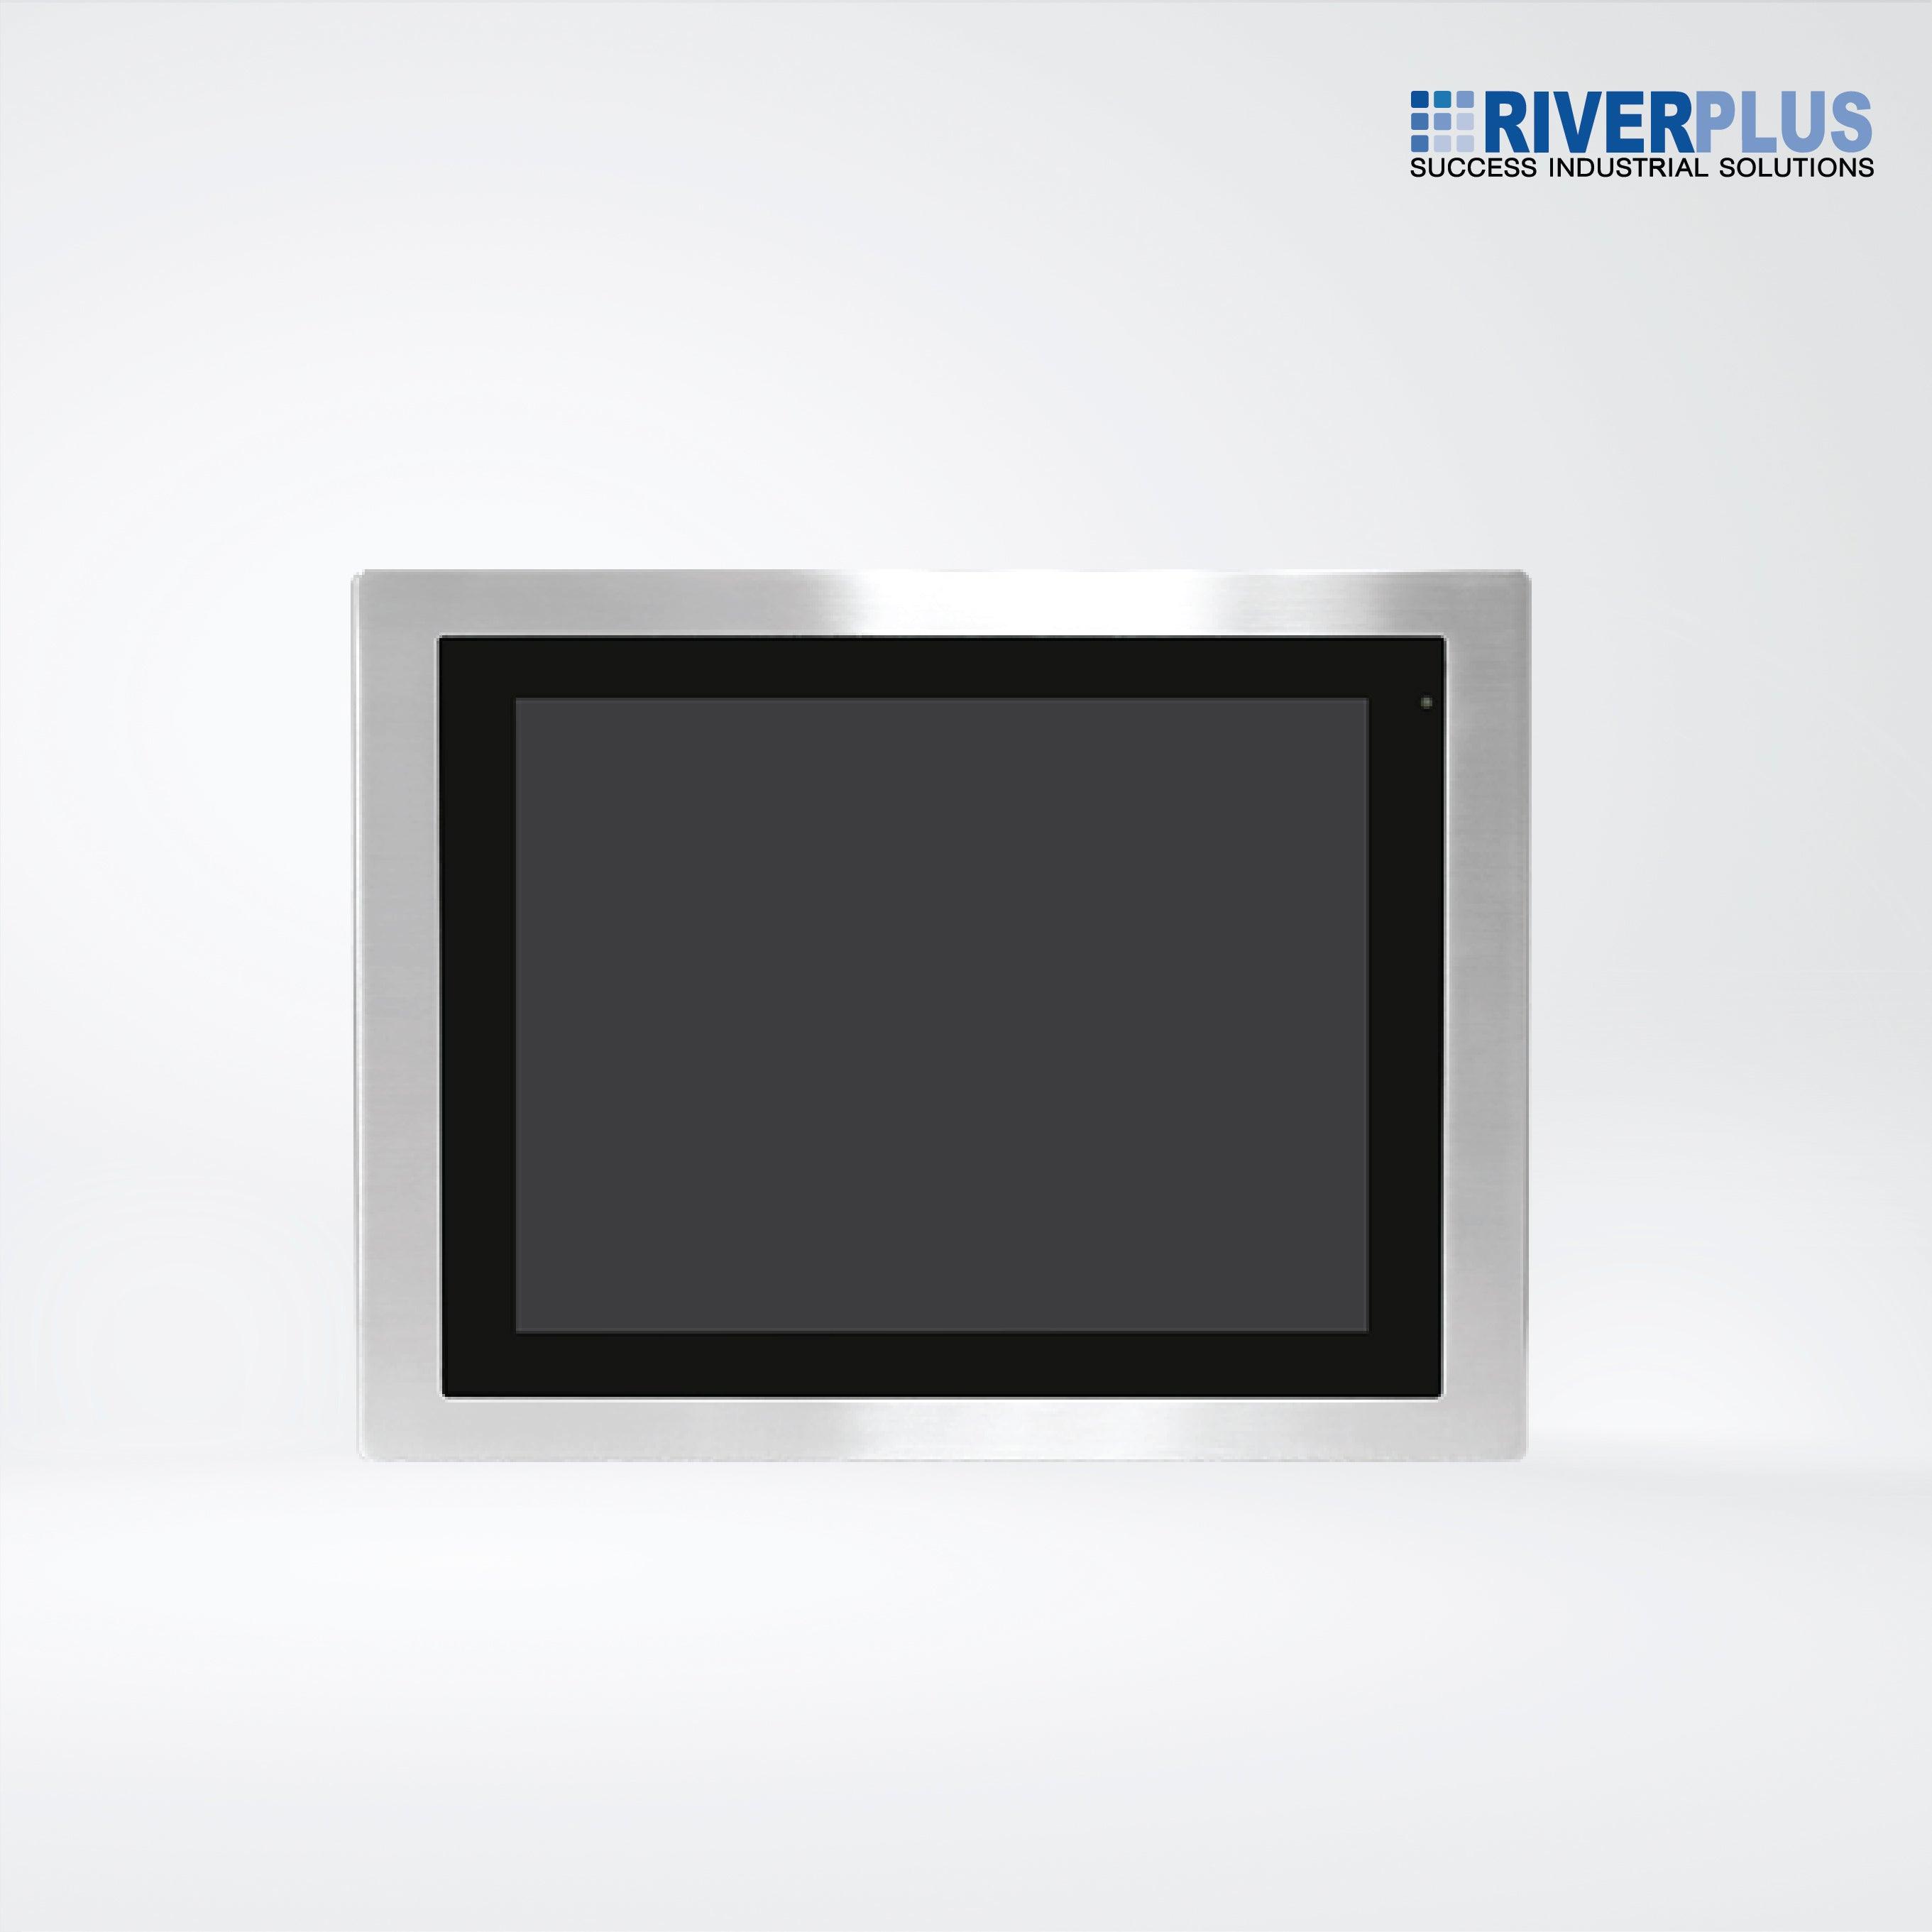 FABS-115R 15” Flat Front Panel IP66 Stainless Chassis Display - Riverplus